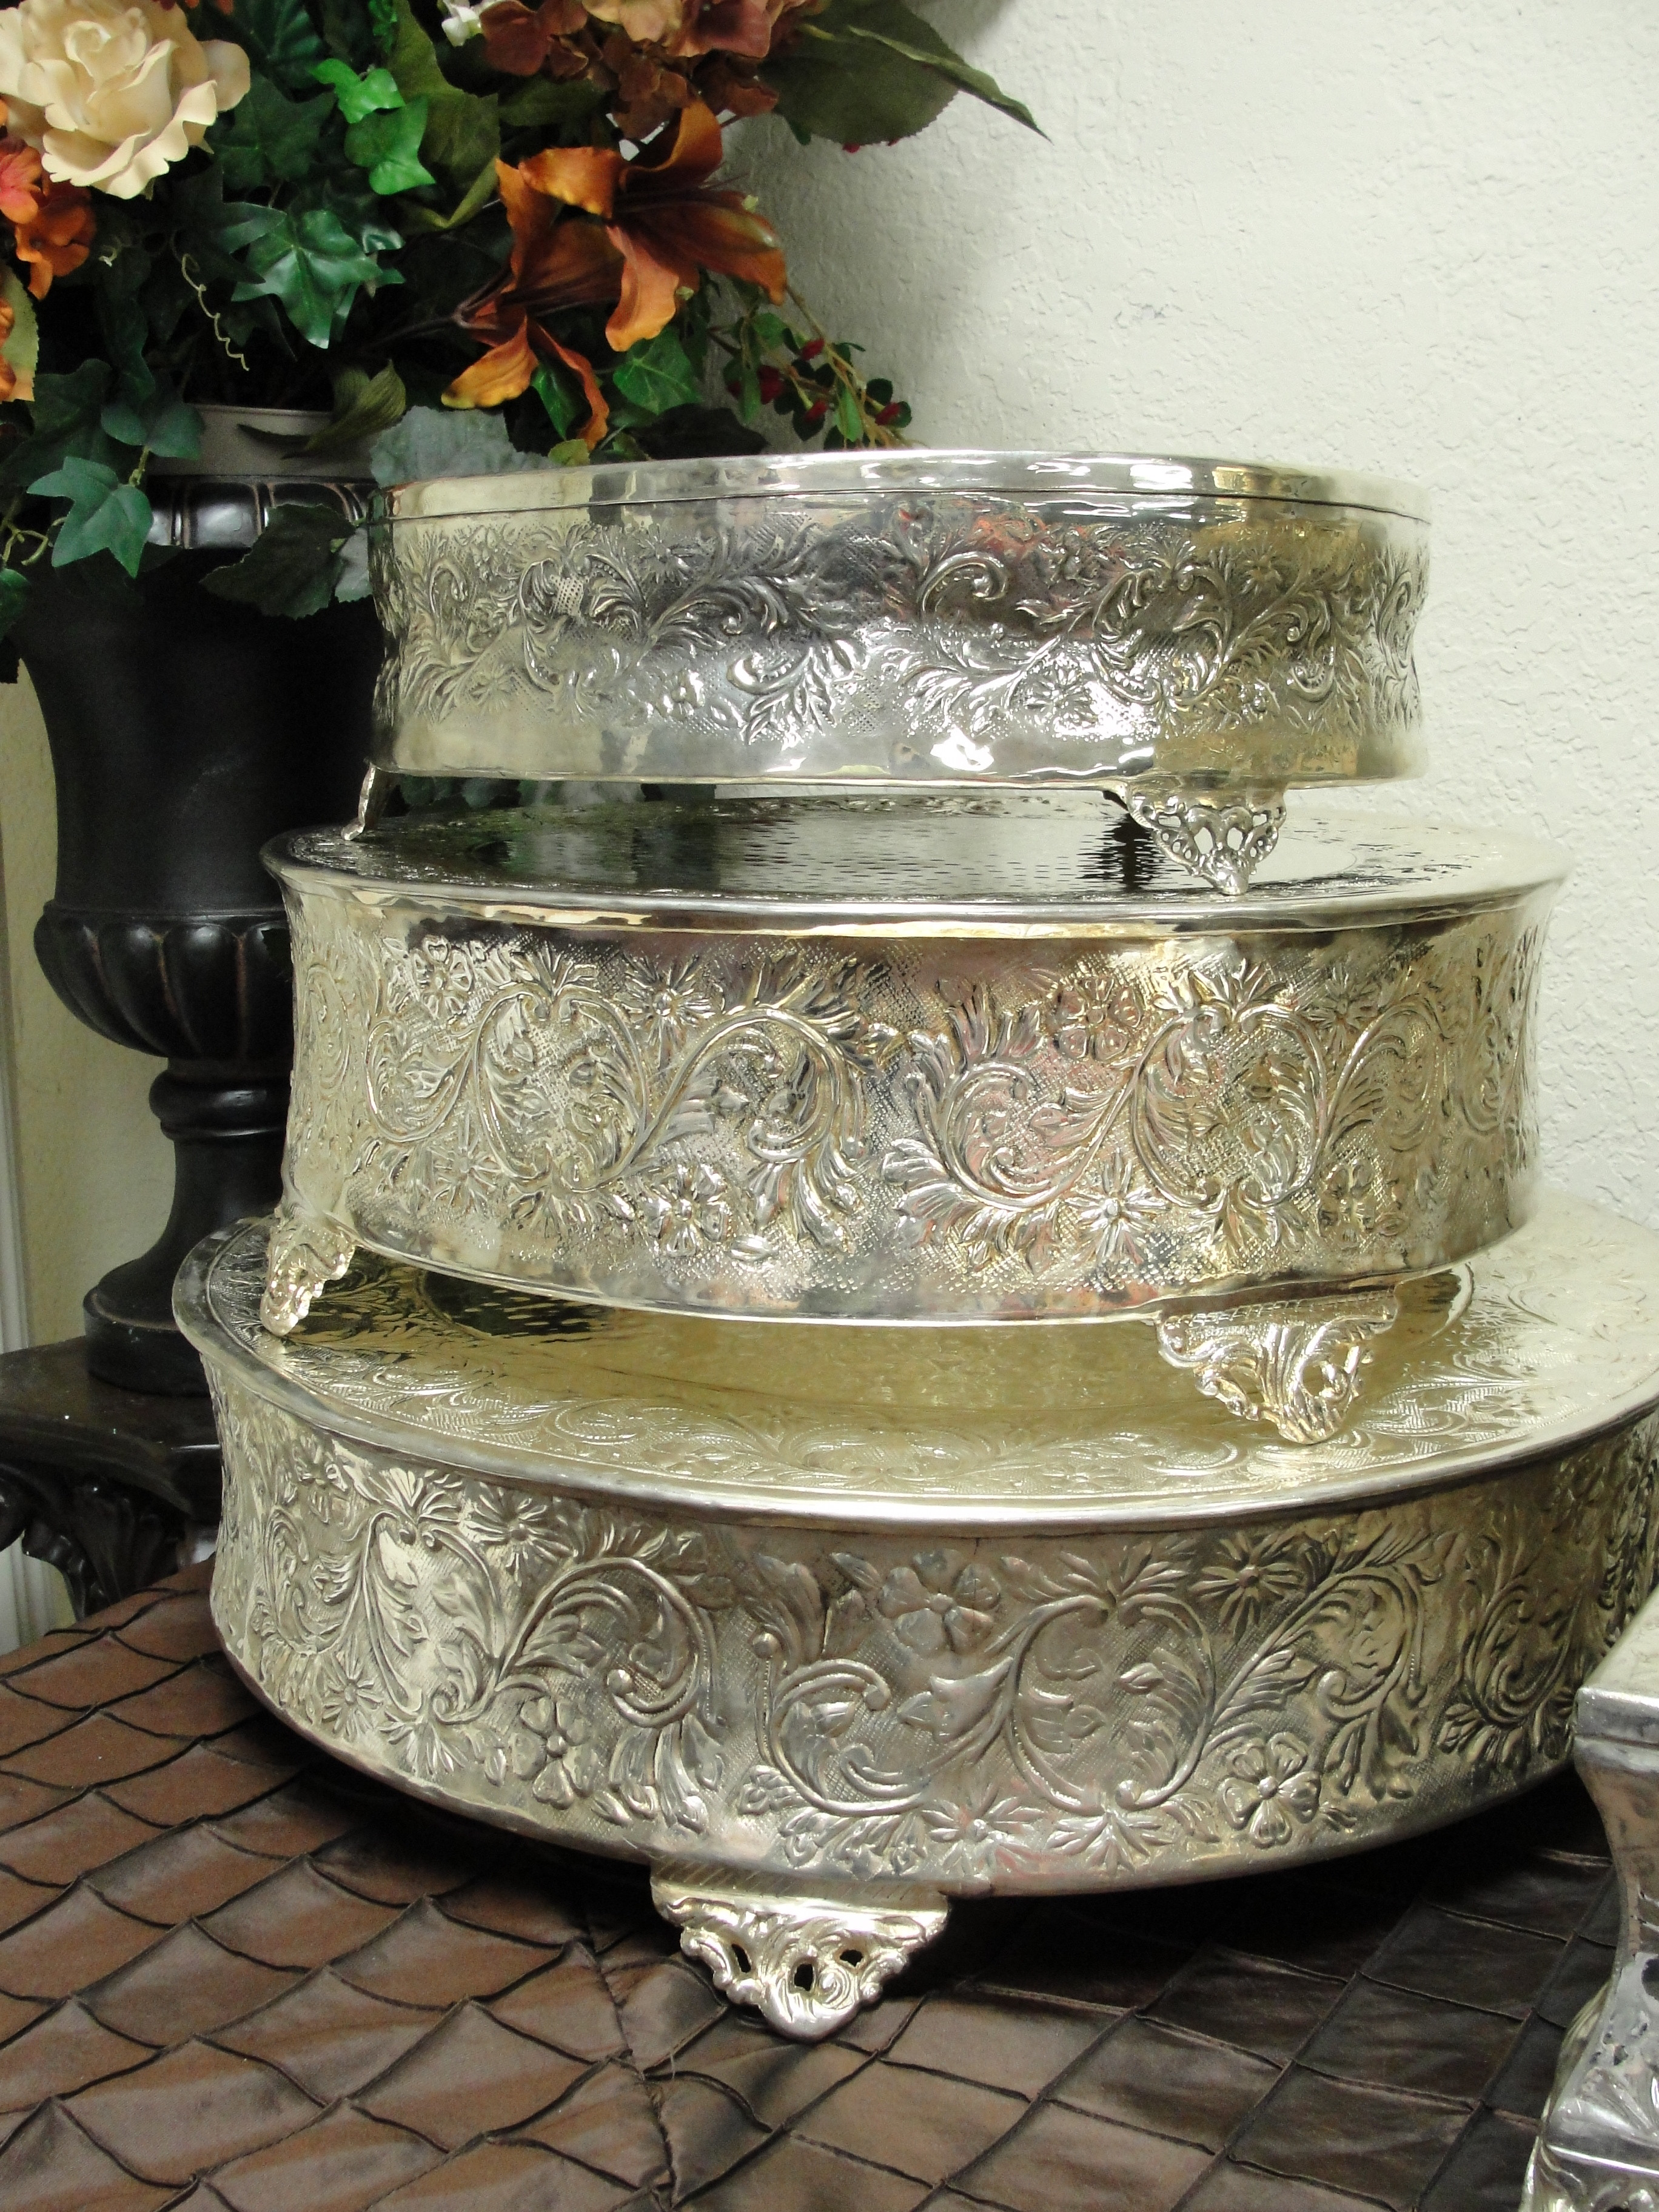 Silver Cake Stands For Wedding Cakes
 Simply Elegant Weddings Cake Stands Silver Gold Silver